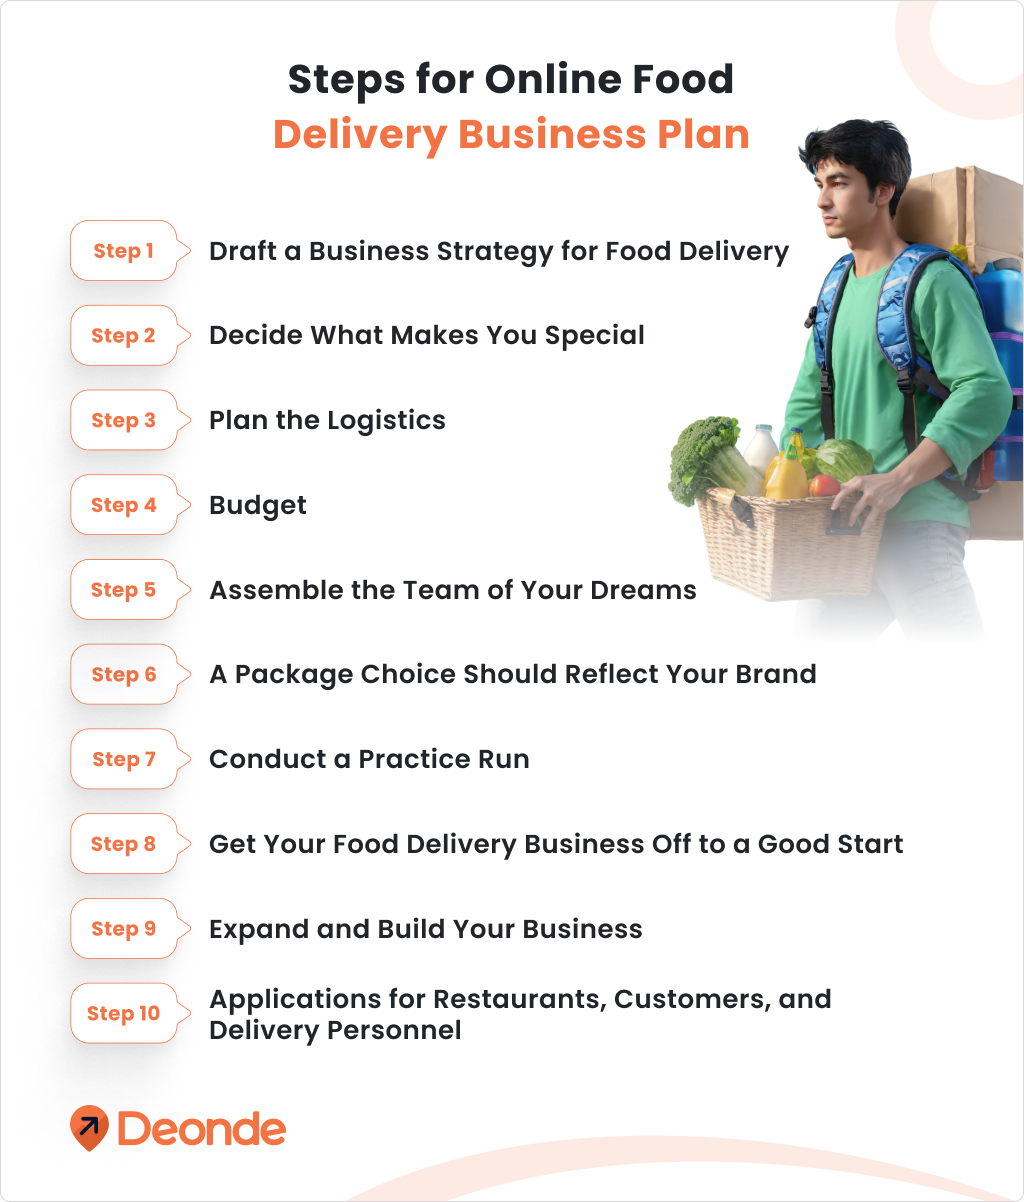 Steps for Online Food Delivery Business Plan